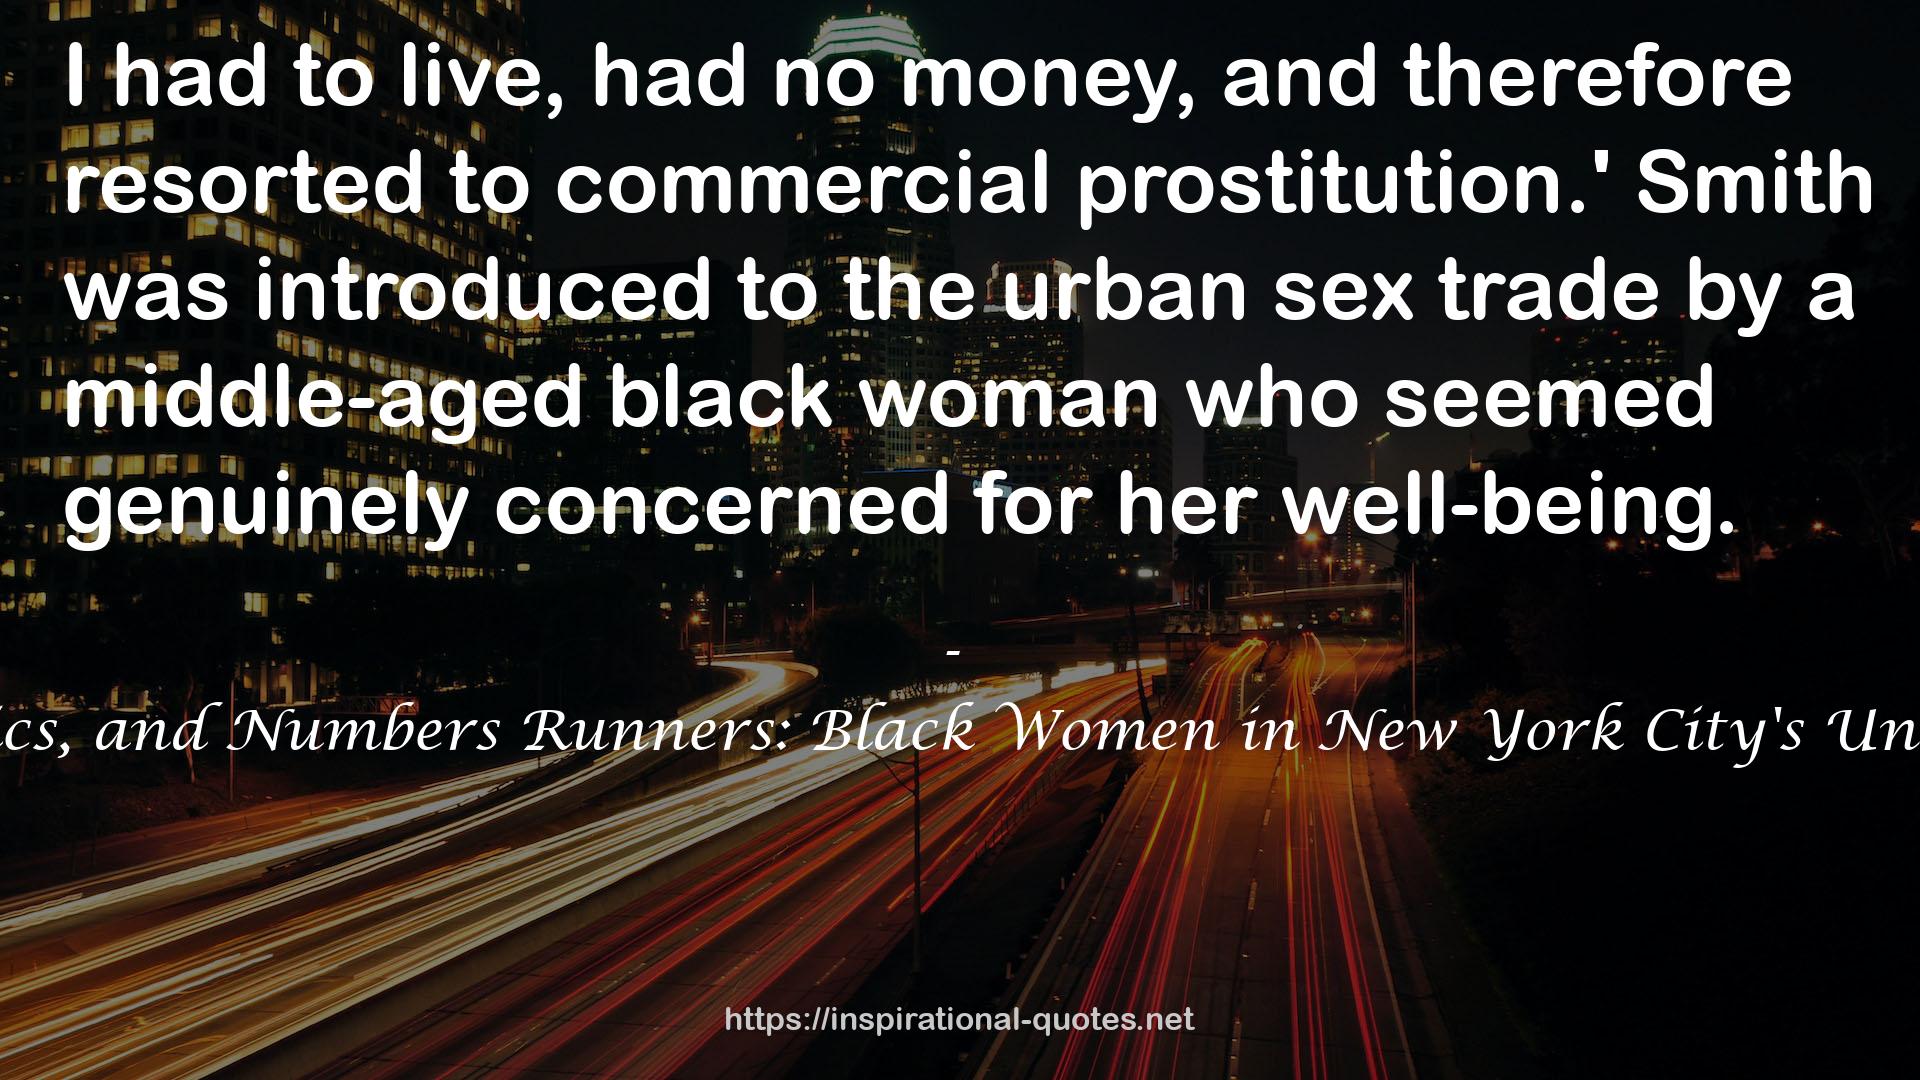 Sex Workers, Psychics, and Numbers Runners: Black Women in New York City's Underground Economy QUOTES